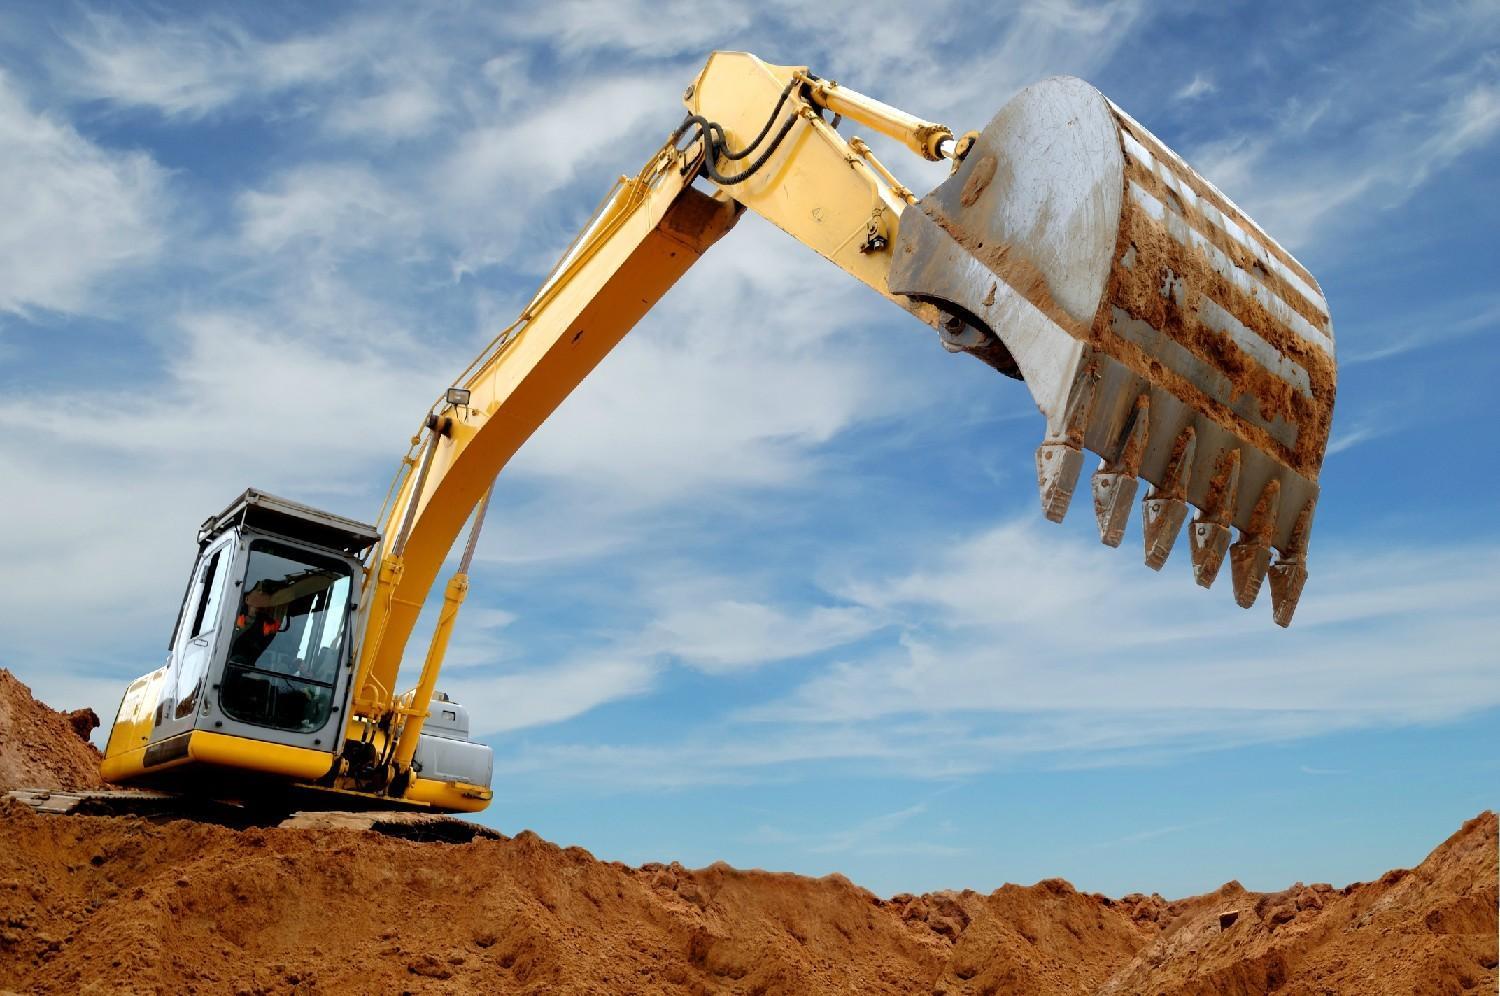 Tips for the Proper Use & Maintenance of Construction Equipment